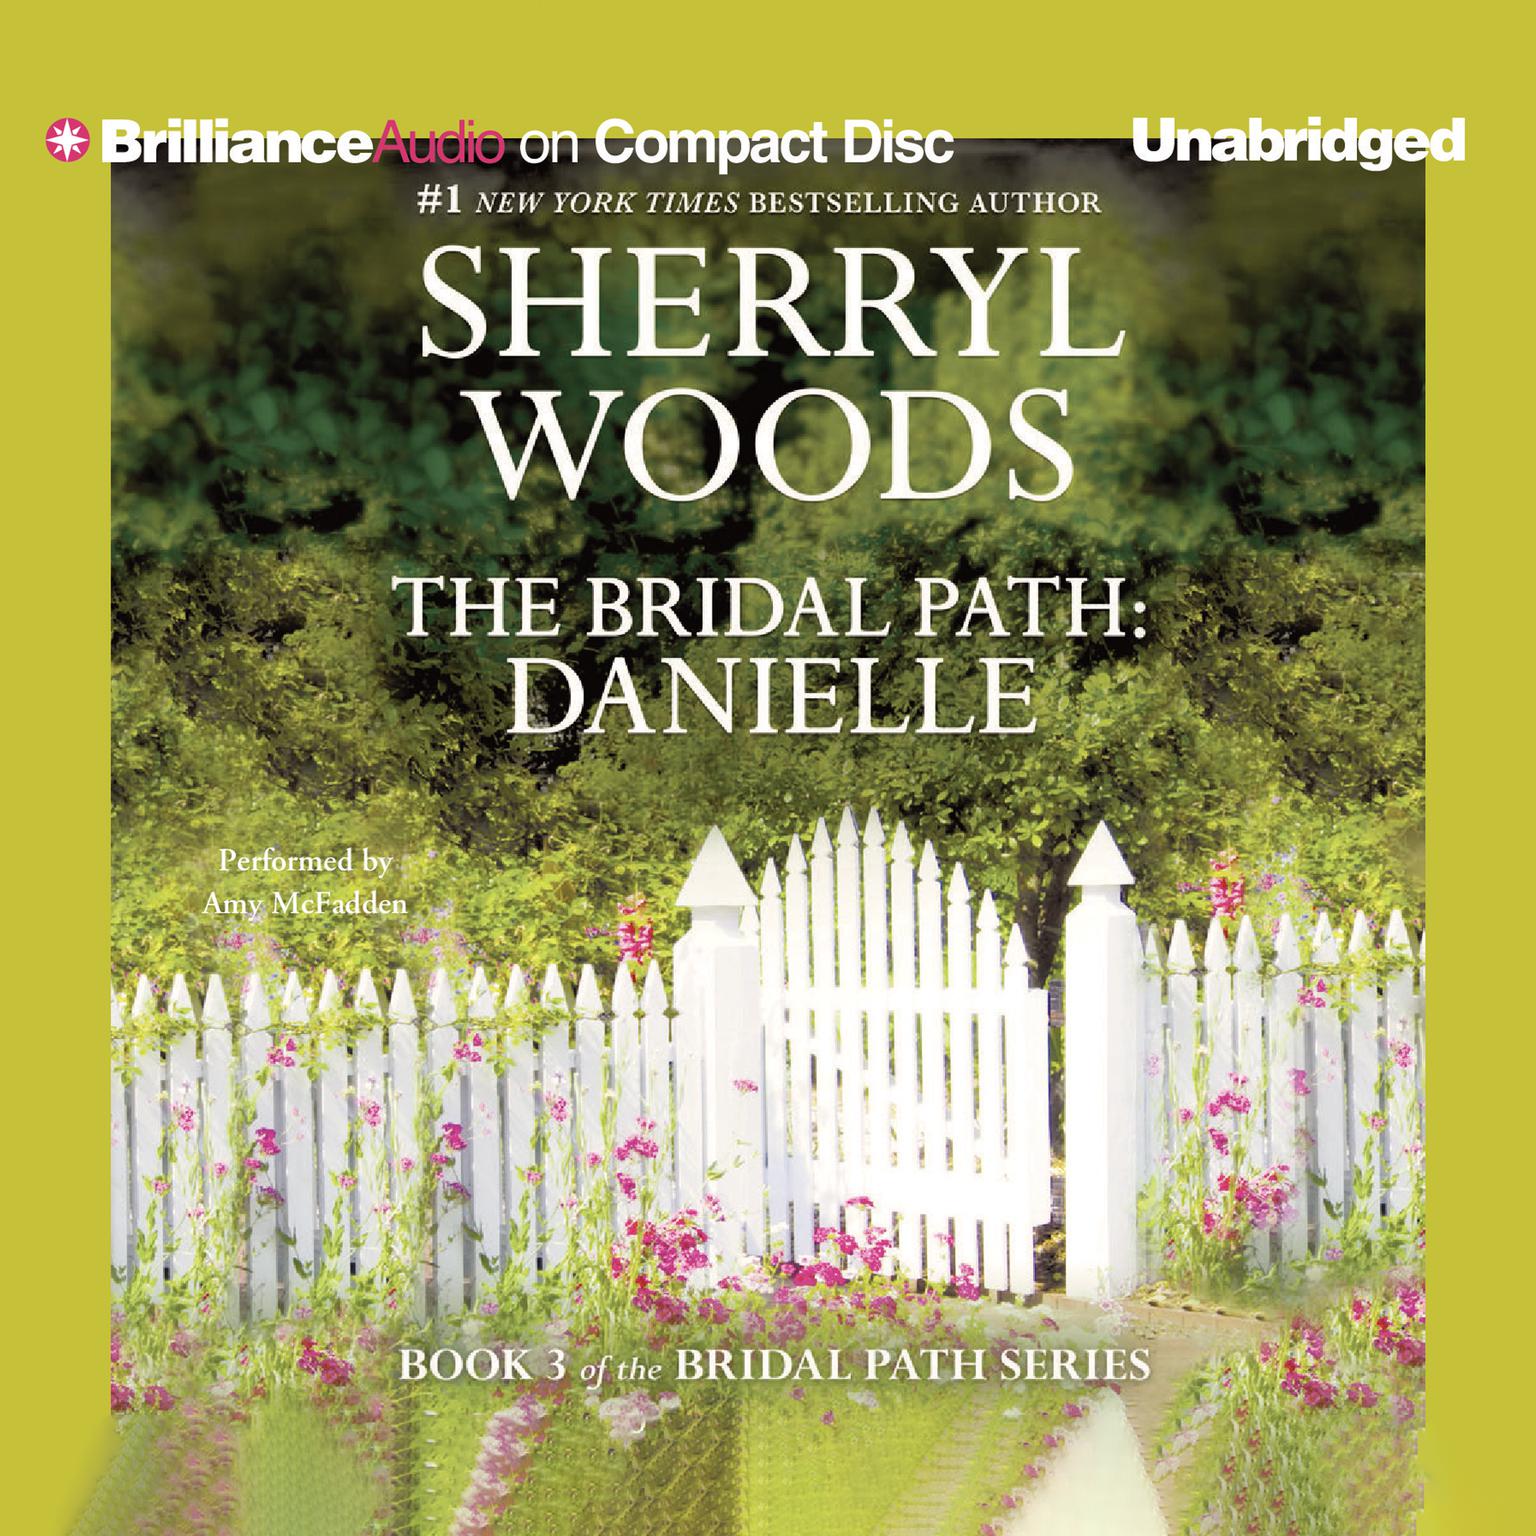 The Bridal Path: Danielle Audiobook, by Sherryl Woods